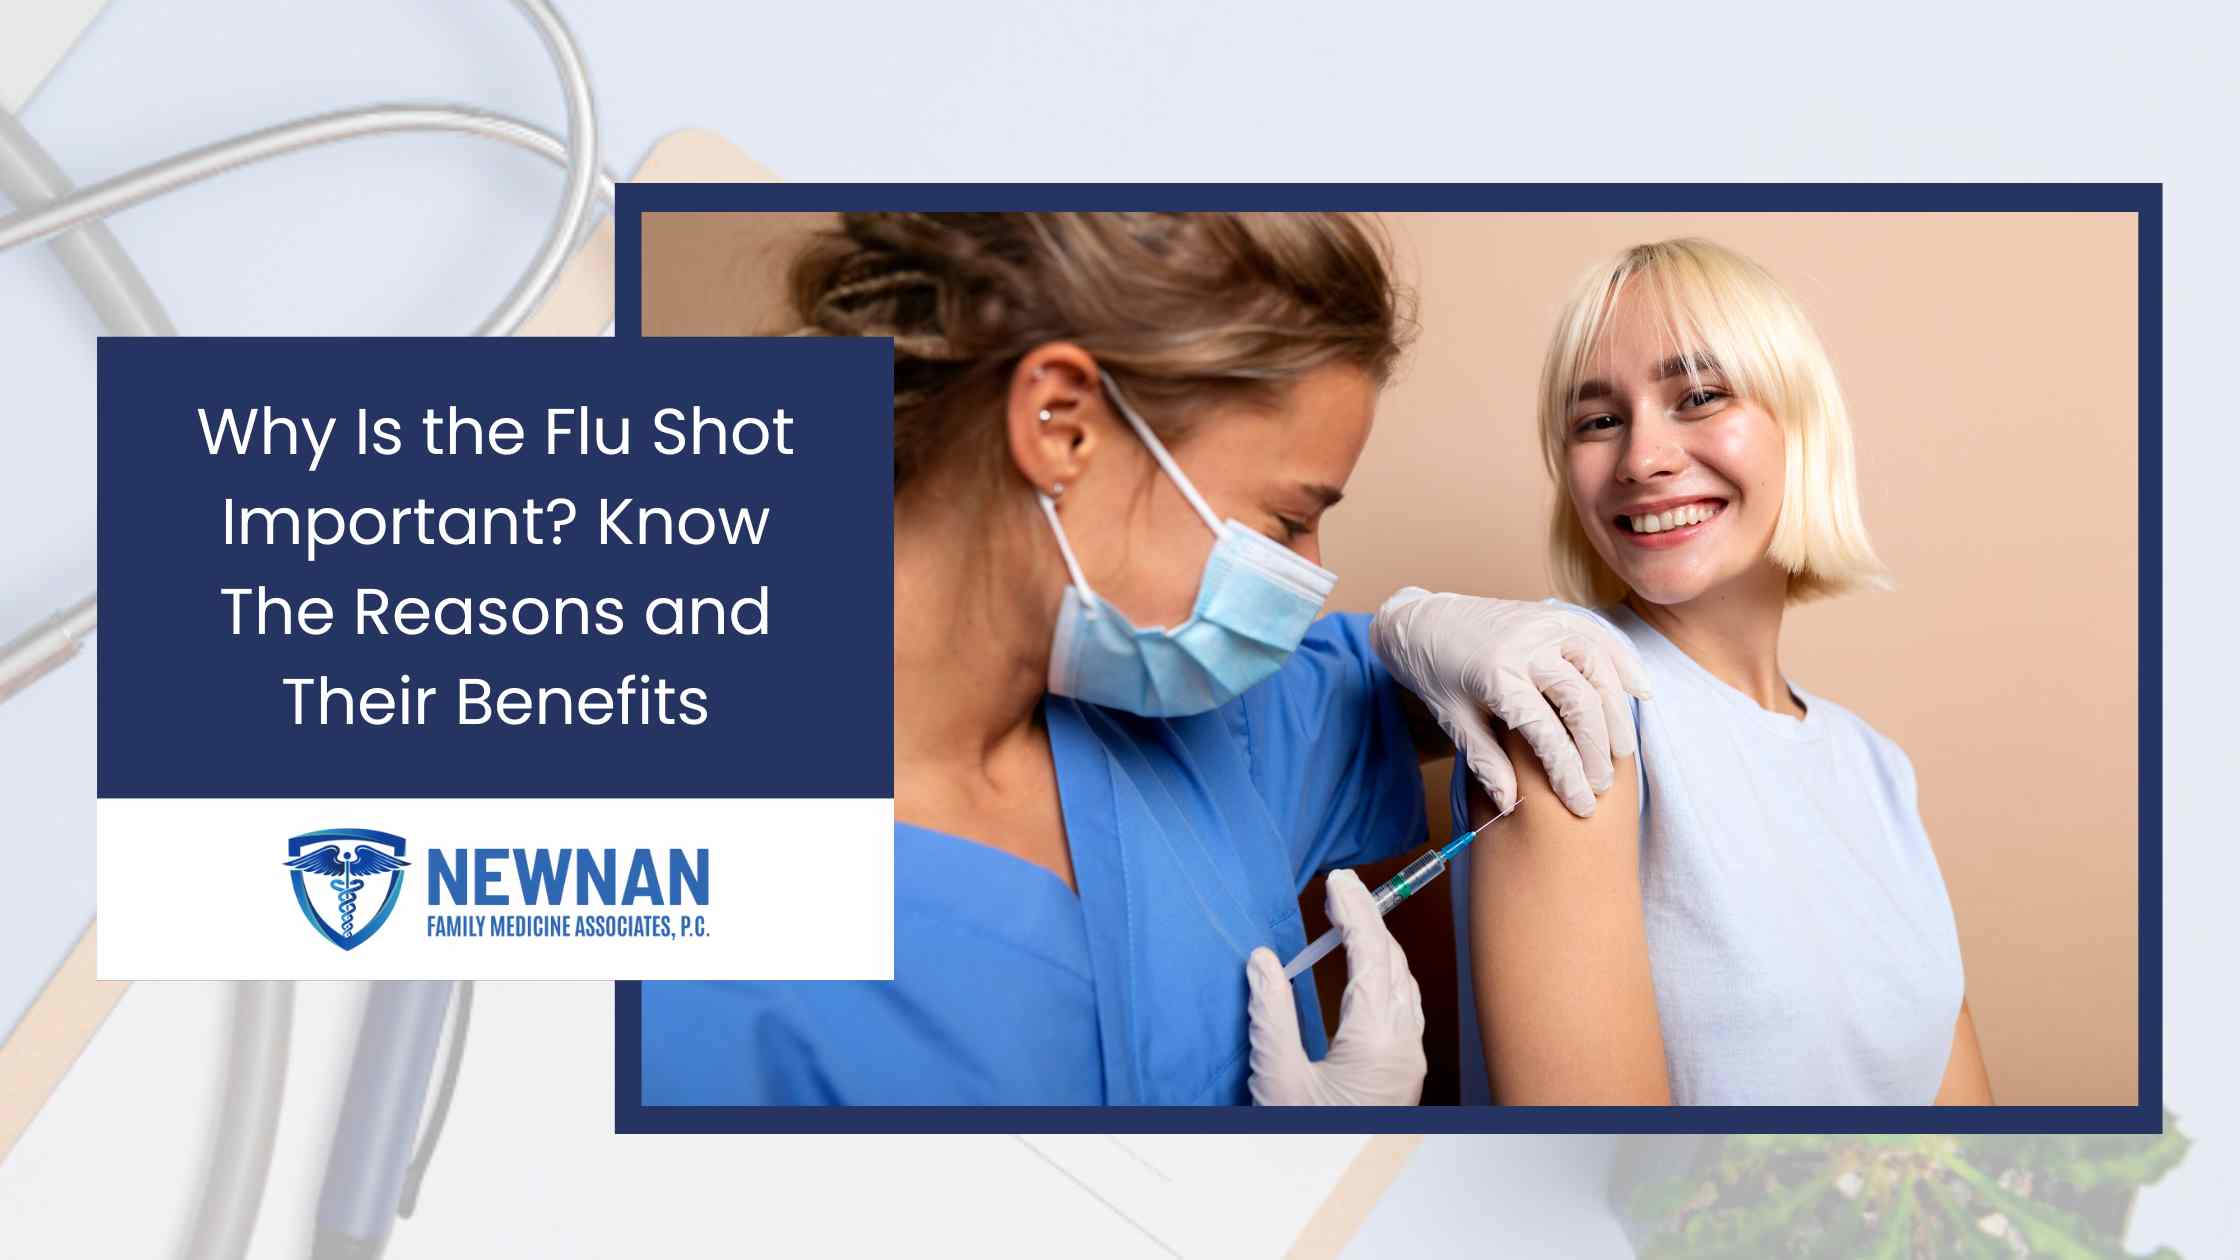 Why Is the Flu Shot Important? Know The Reasons and Their Benefits